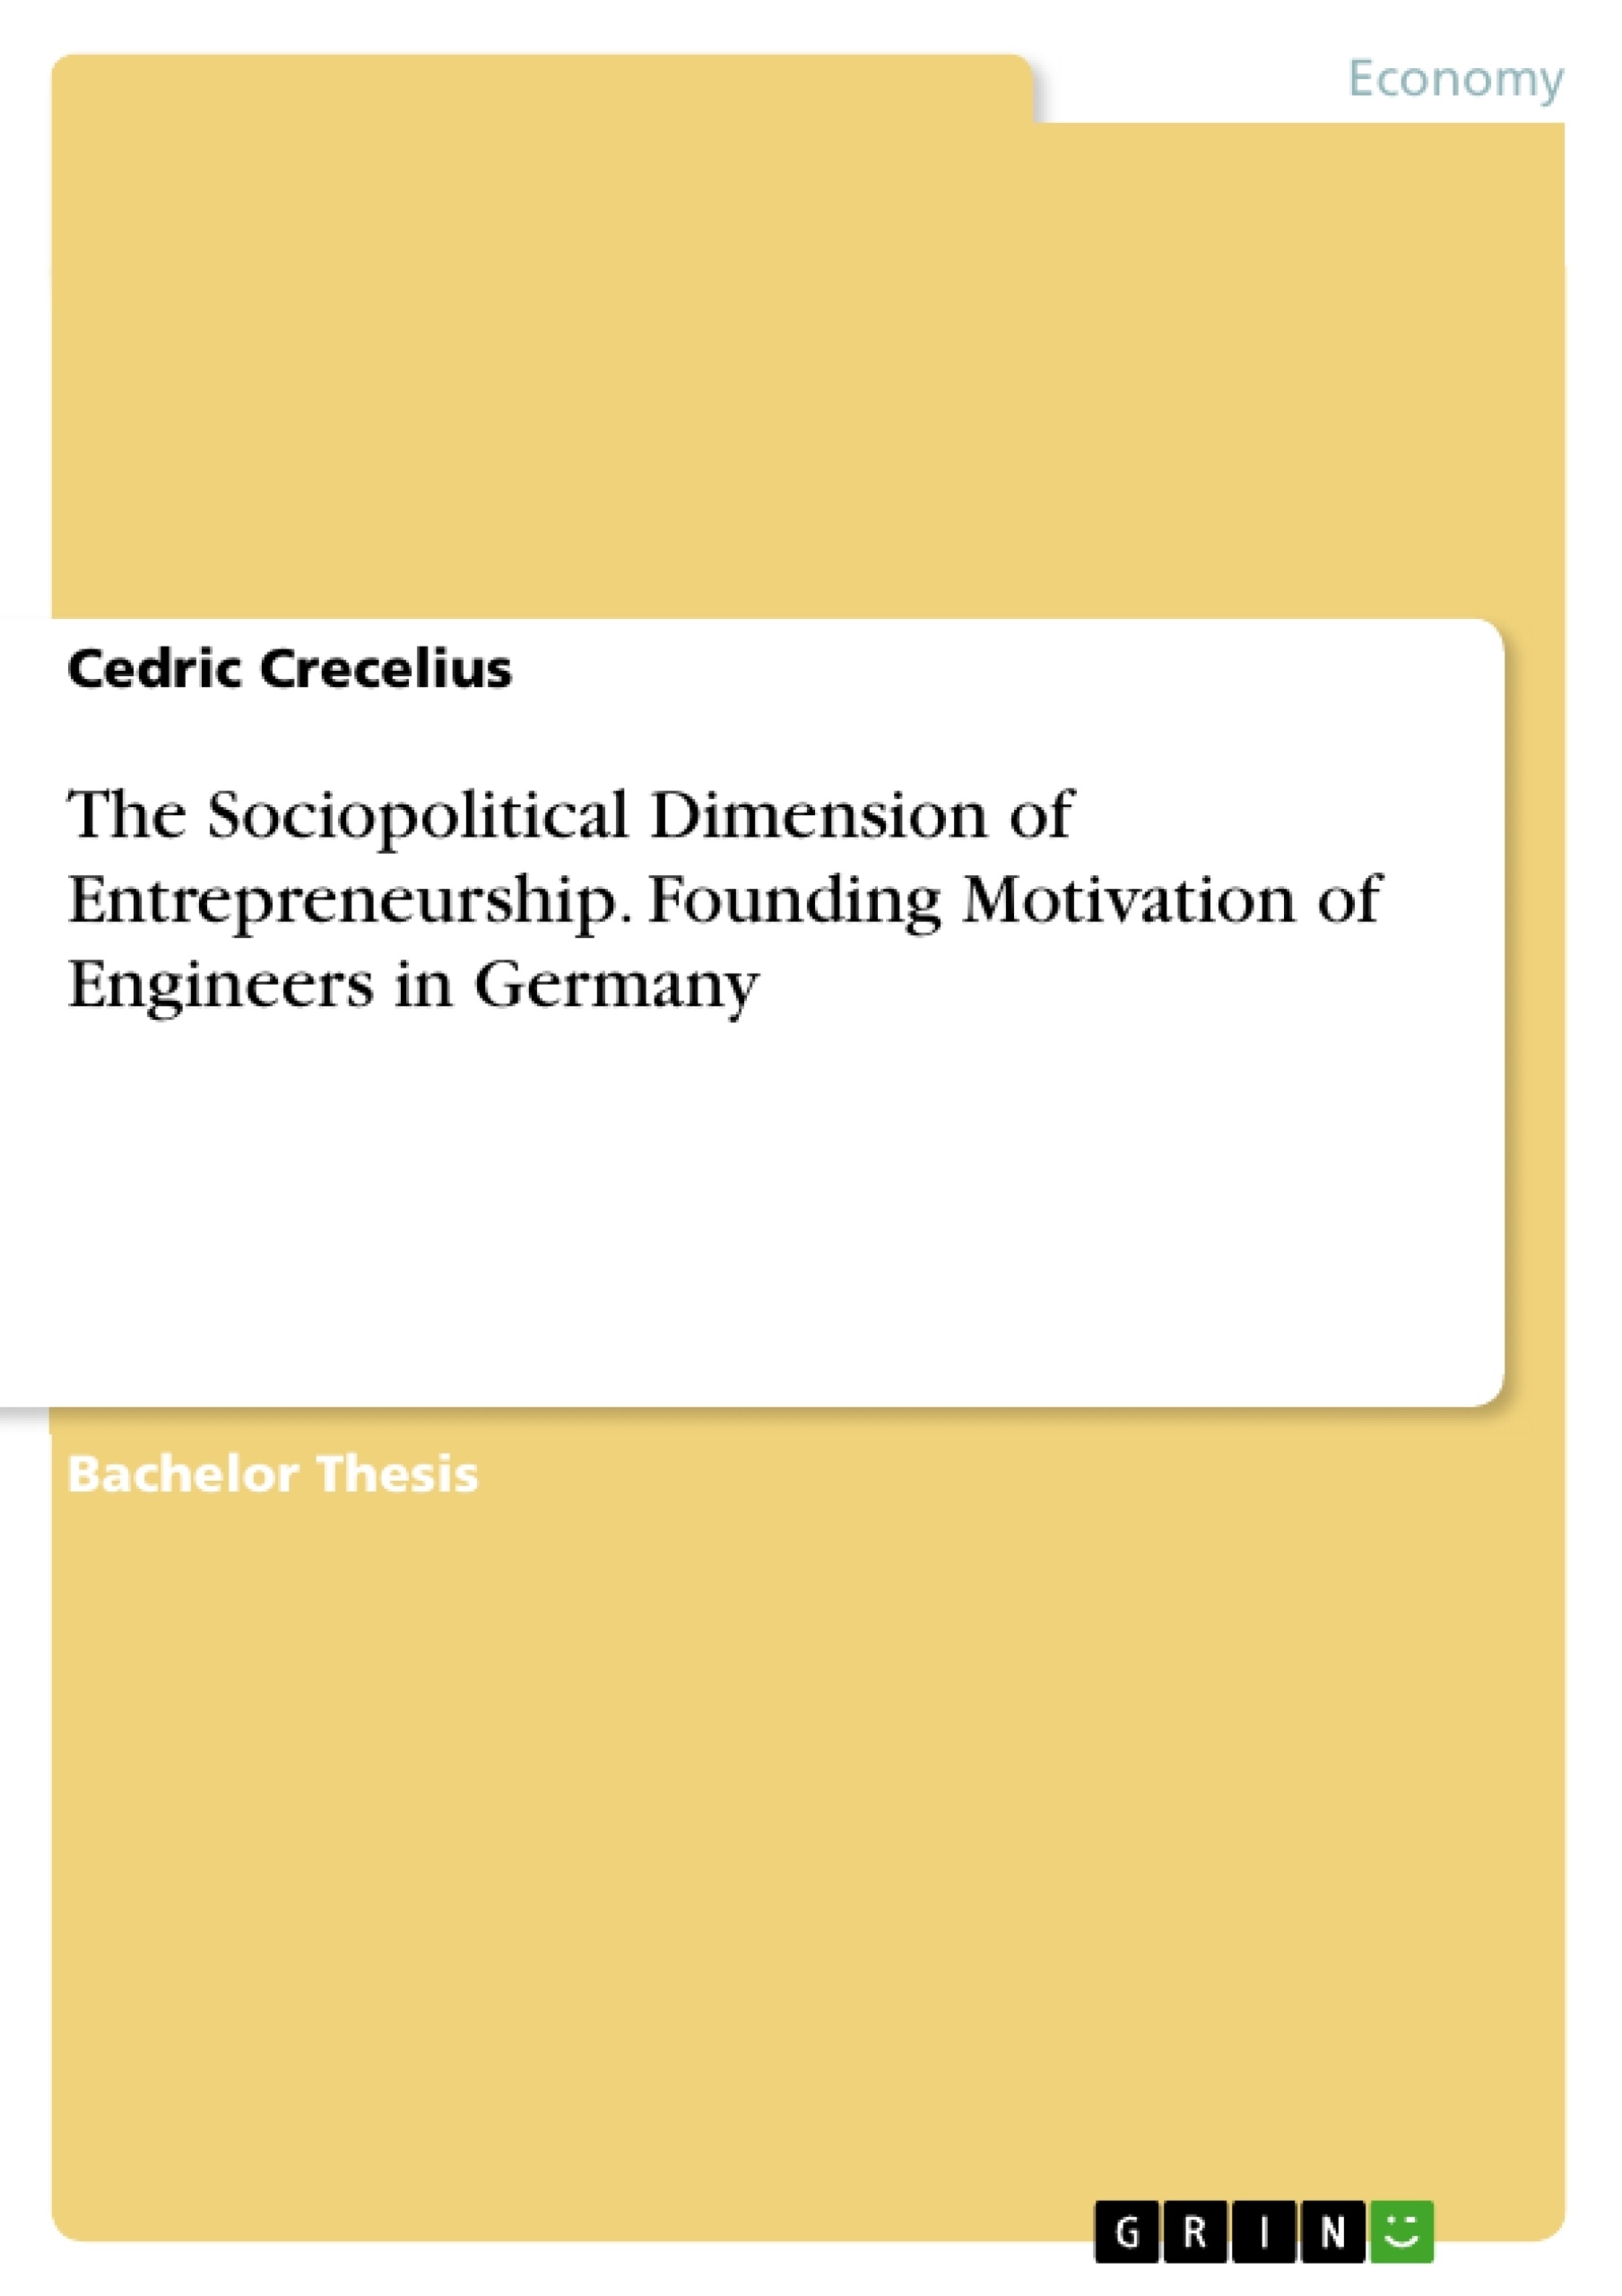 Title: The Sociopolitical Dimension of Entrepreneurship. Founding Motivation of Engineers in Germany